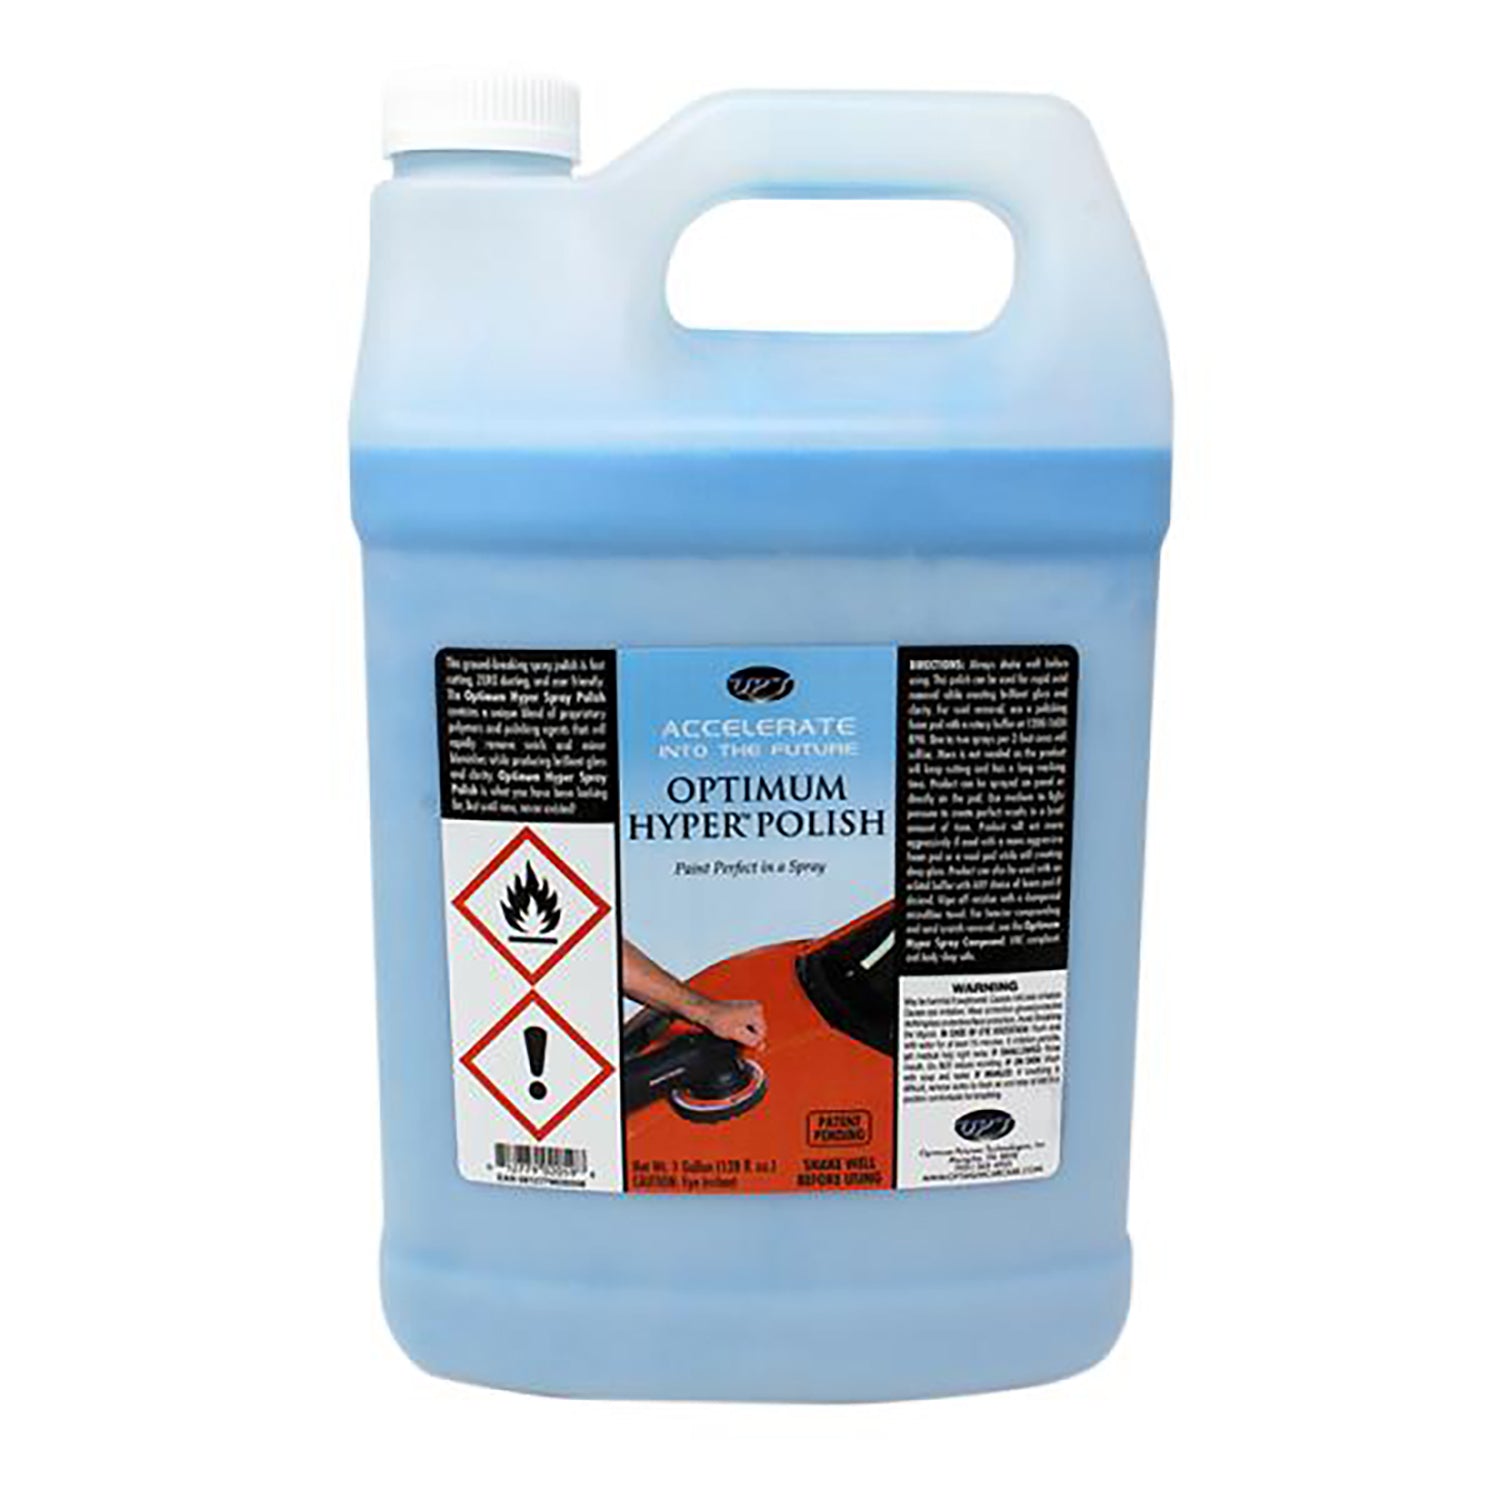 1-Gal.) & (5-Gal.) PRIME - Professional Tar and Adhesive Remover Spray